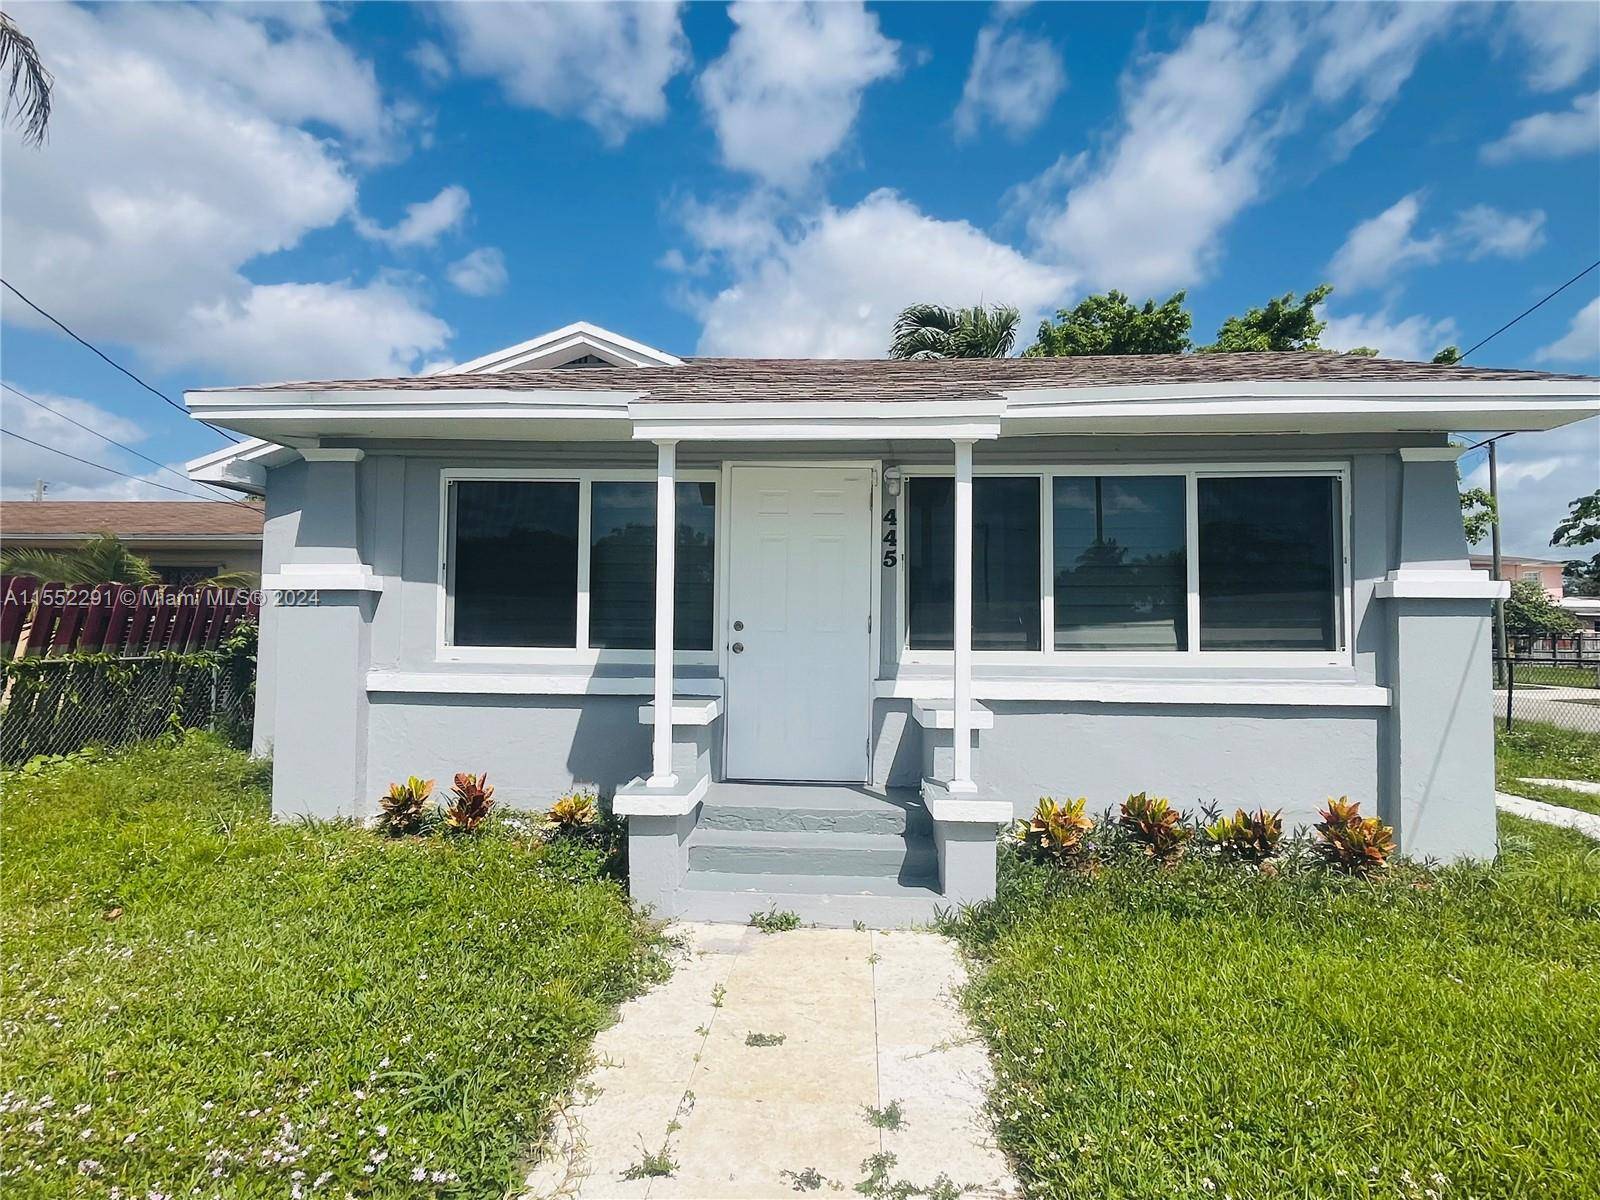 Amazing Property located in a beautiful neighborhood, NORTH MIAMI BEACH Completely Remodeled, Consists of 3bed 2baths.